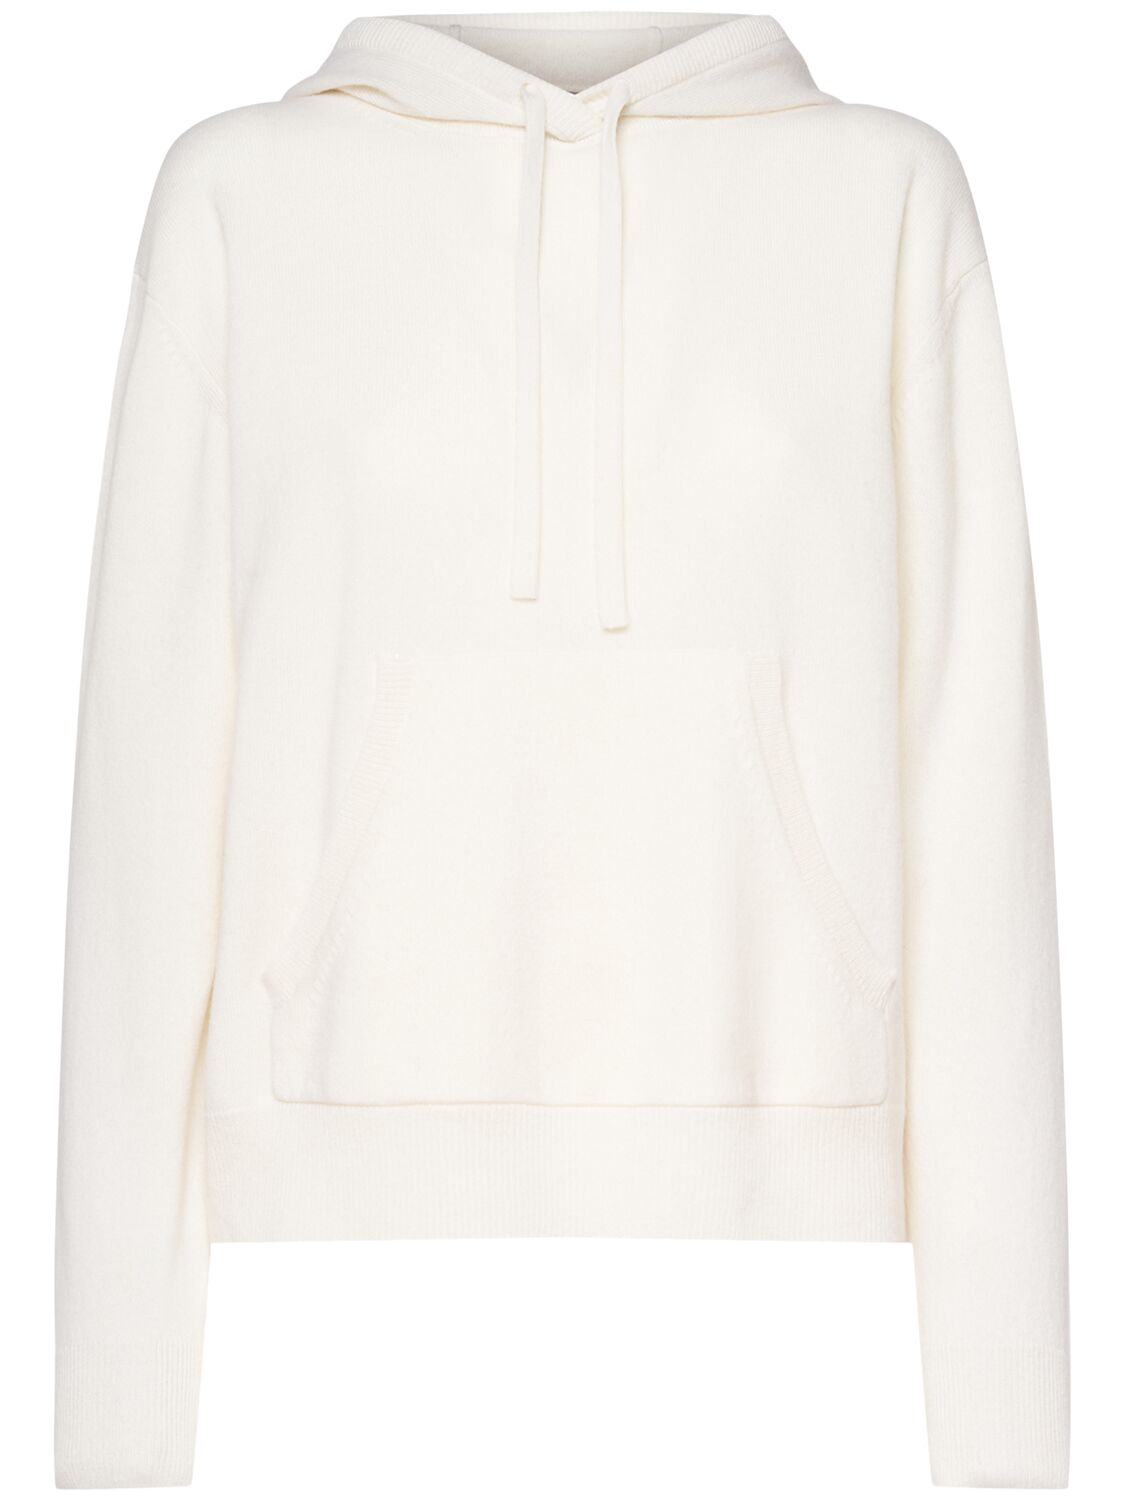 Max Mara Tenente Hooded Wool & Cashmere Sweater In White